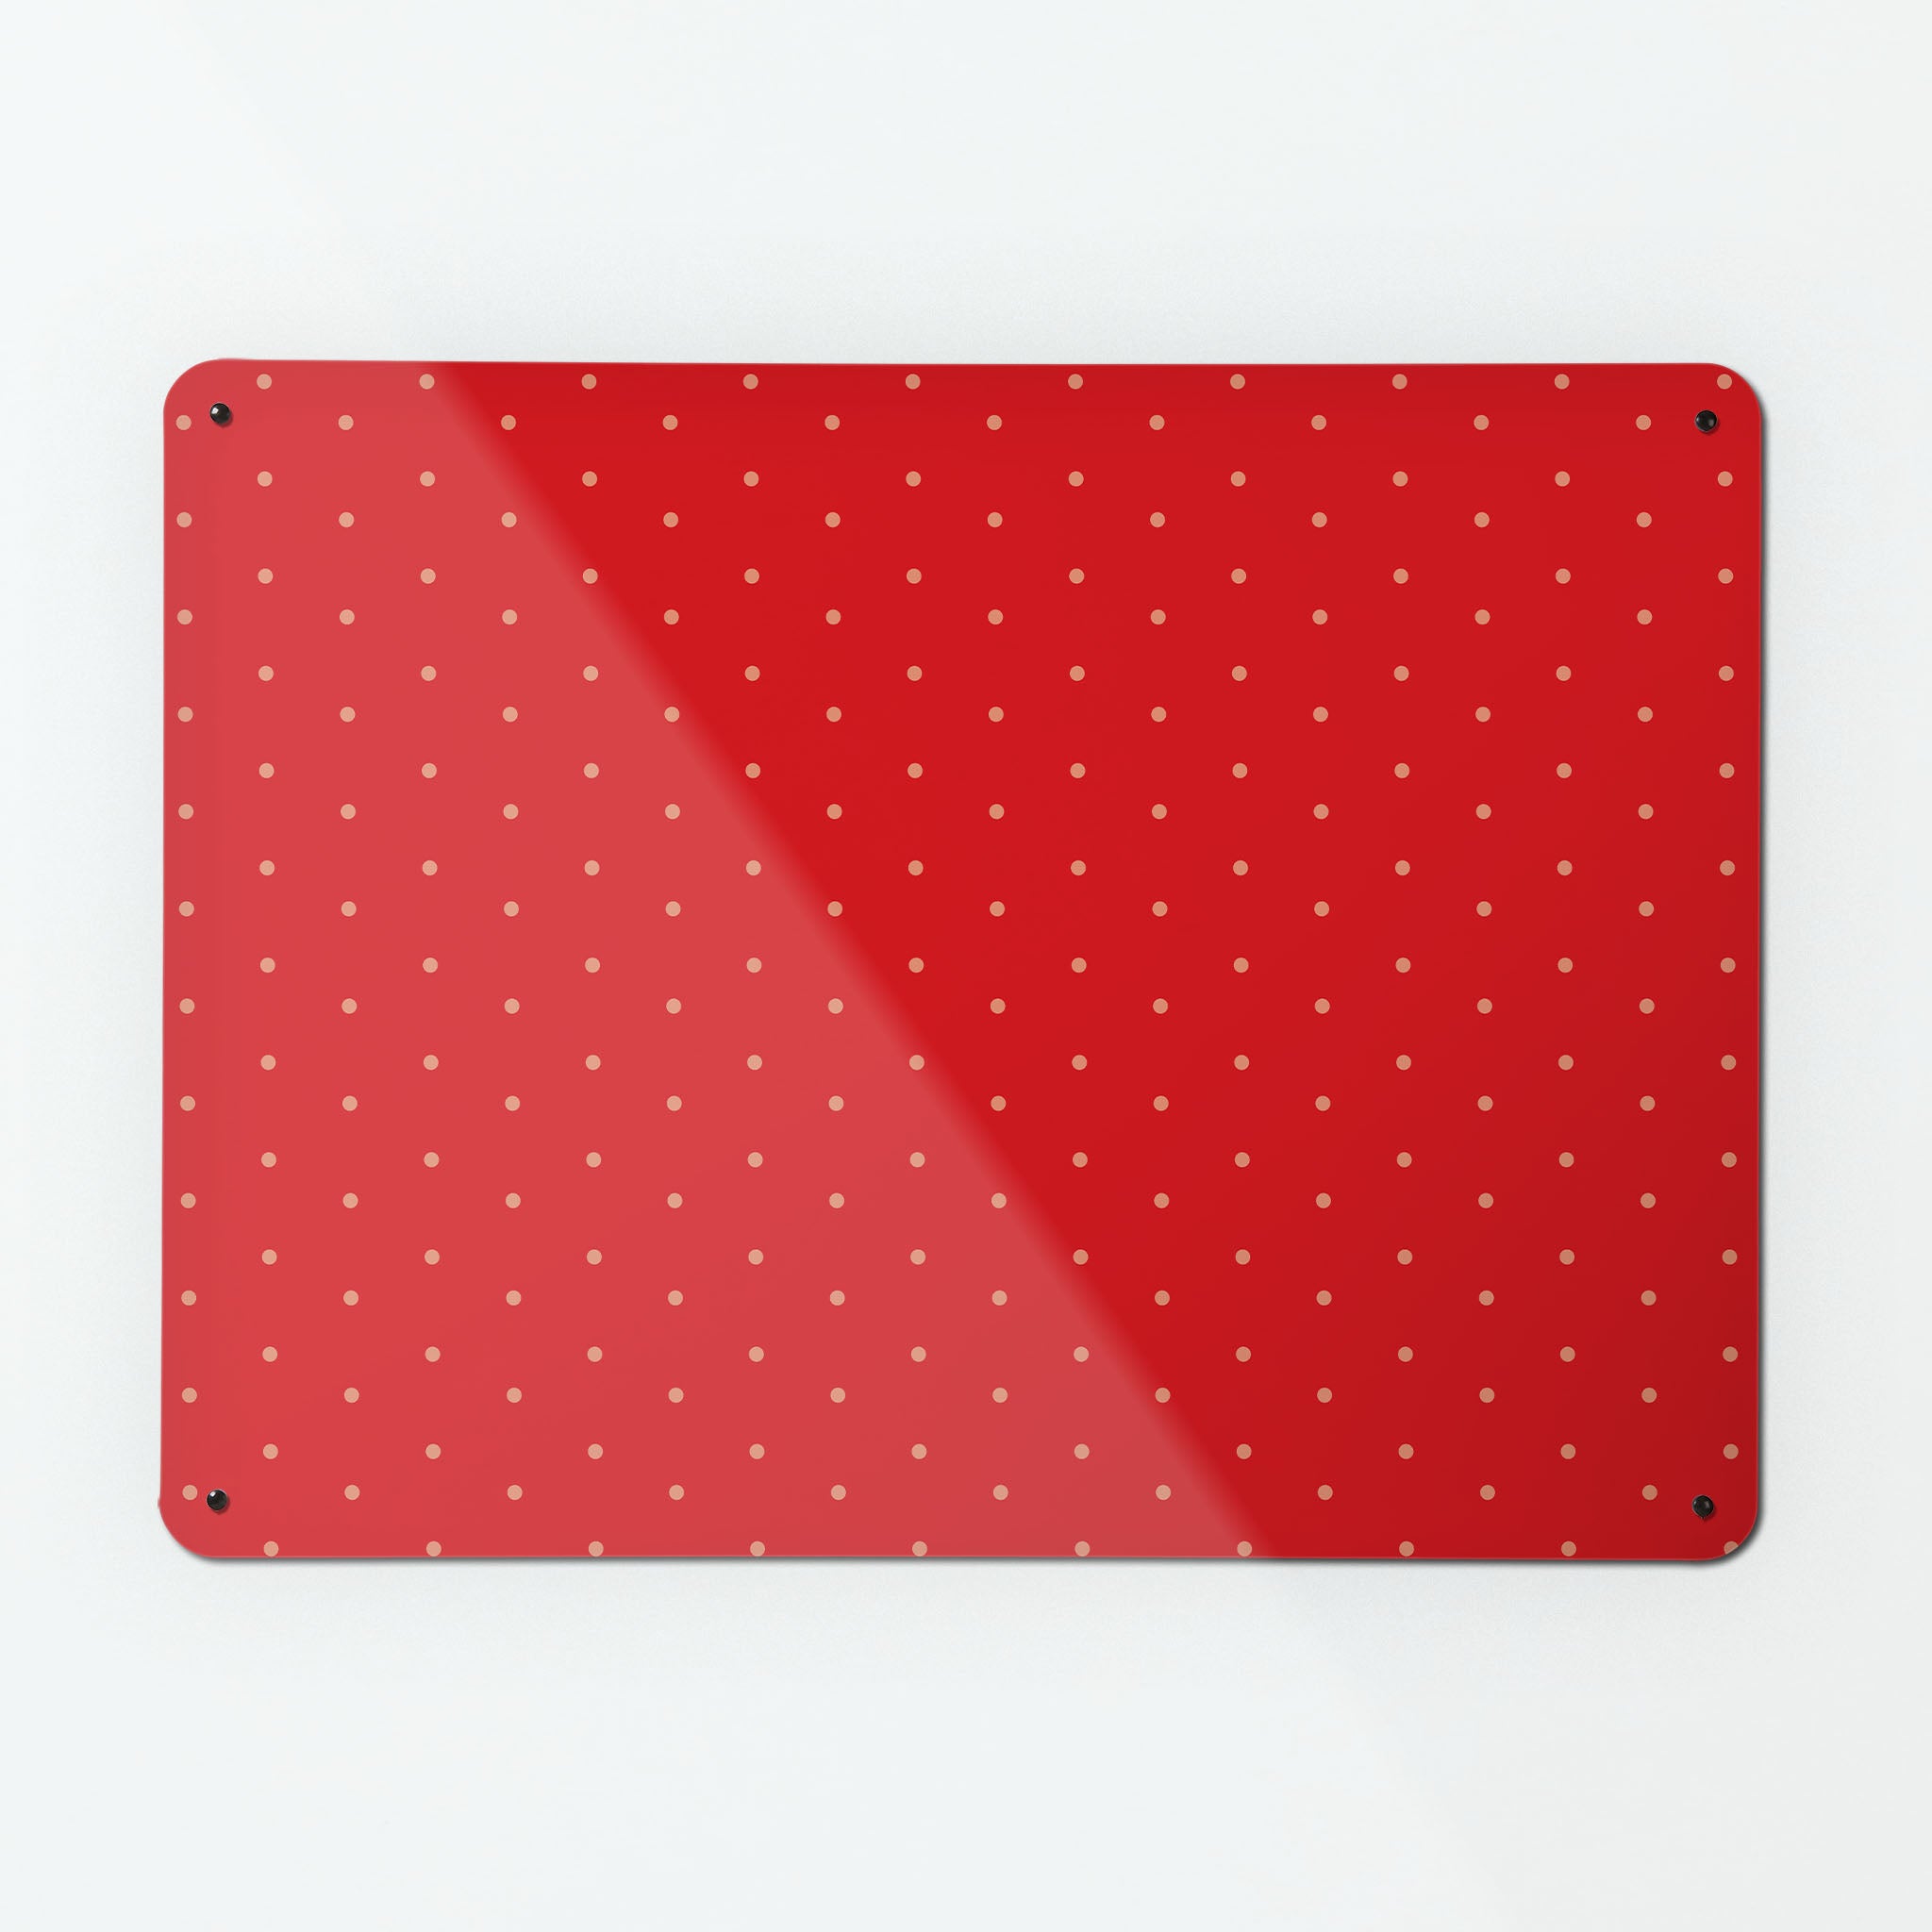 A large magnetic notice board by Beyond the Fridge with a pink polkadots on a red background pattern